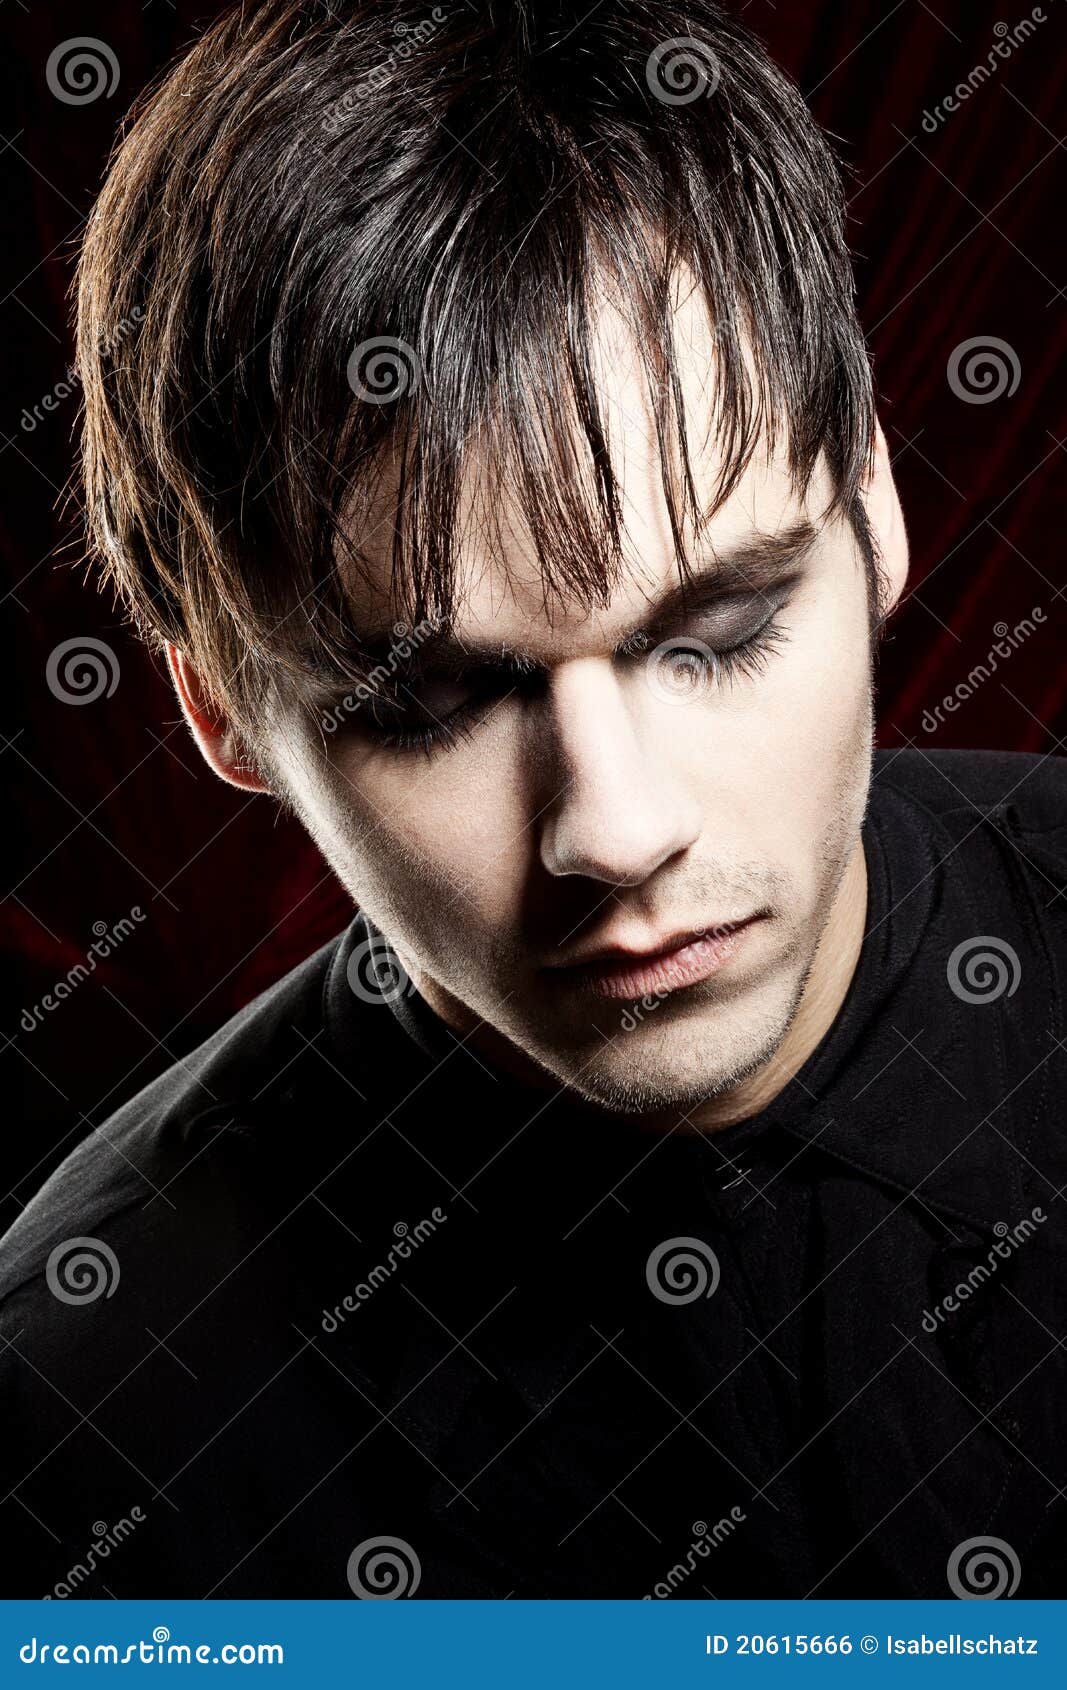 Male Vampire With A Bloody Drink Stock Image | CartoonDealer.com #21652723